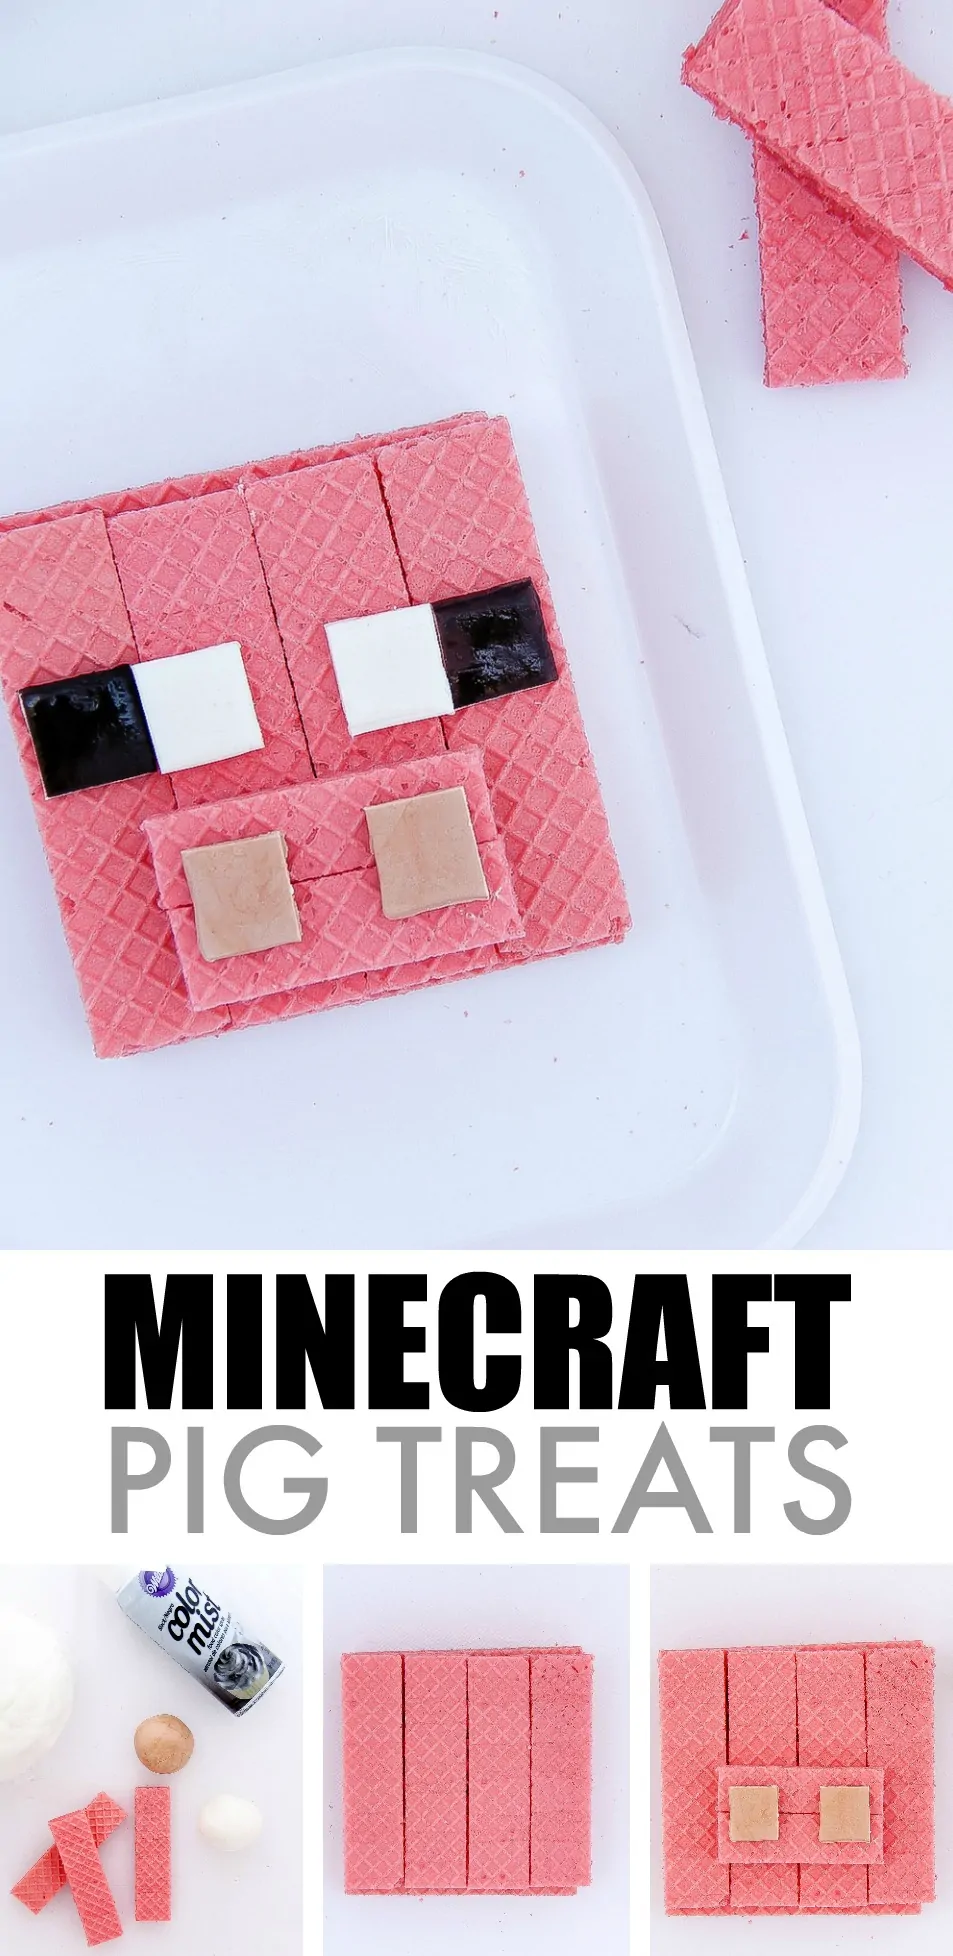 Easy Minecraft Pig treats to make for kids